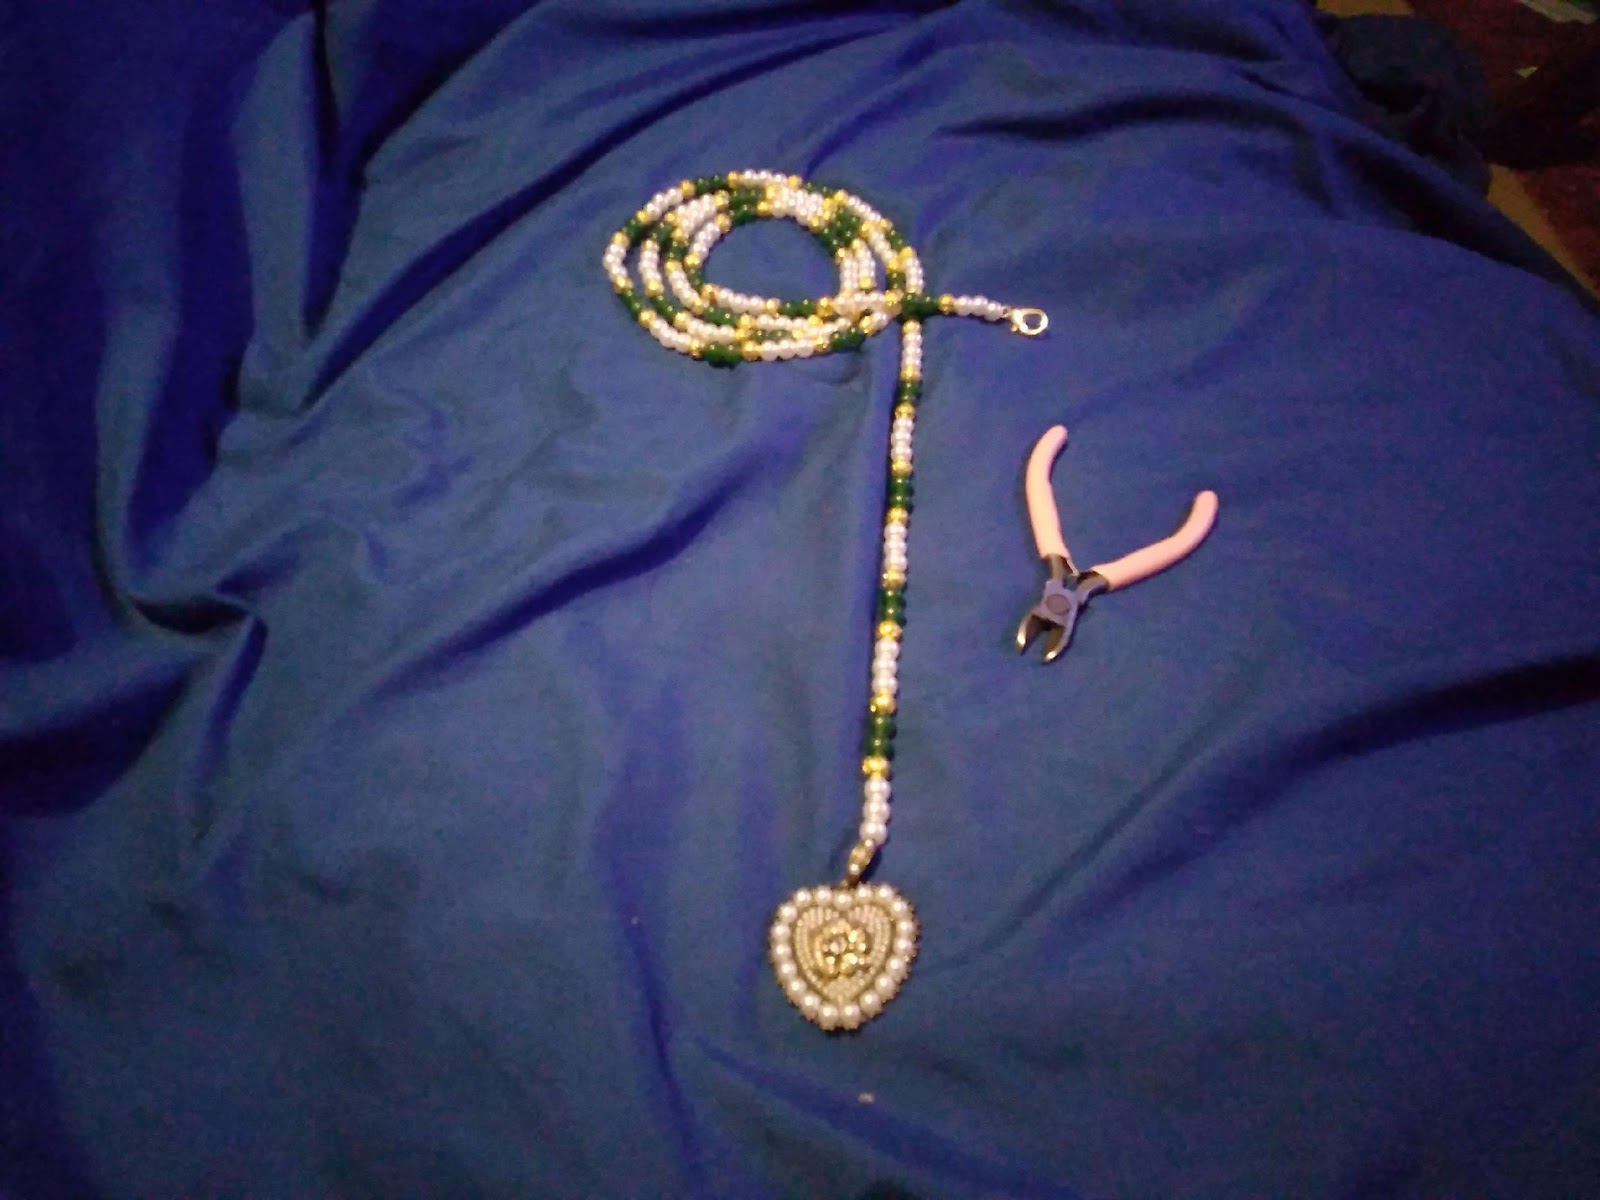 A necklace and a pliers on a blue blanket

Description automatically generated